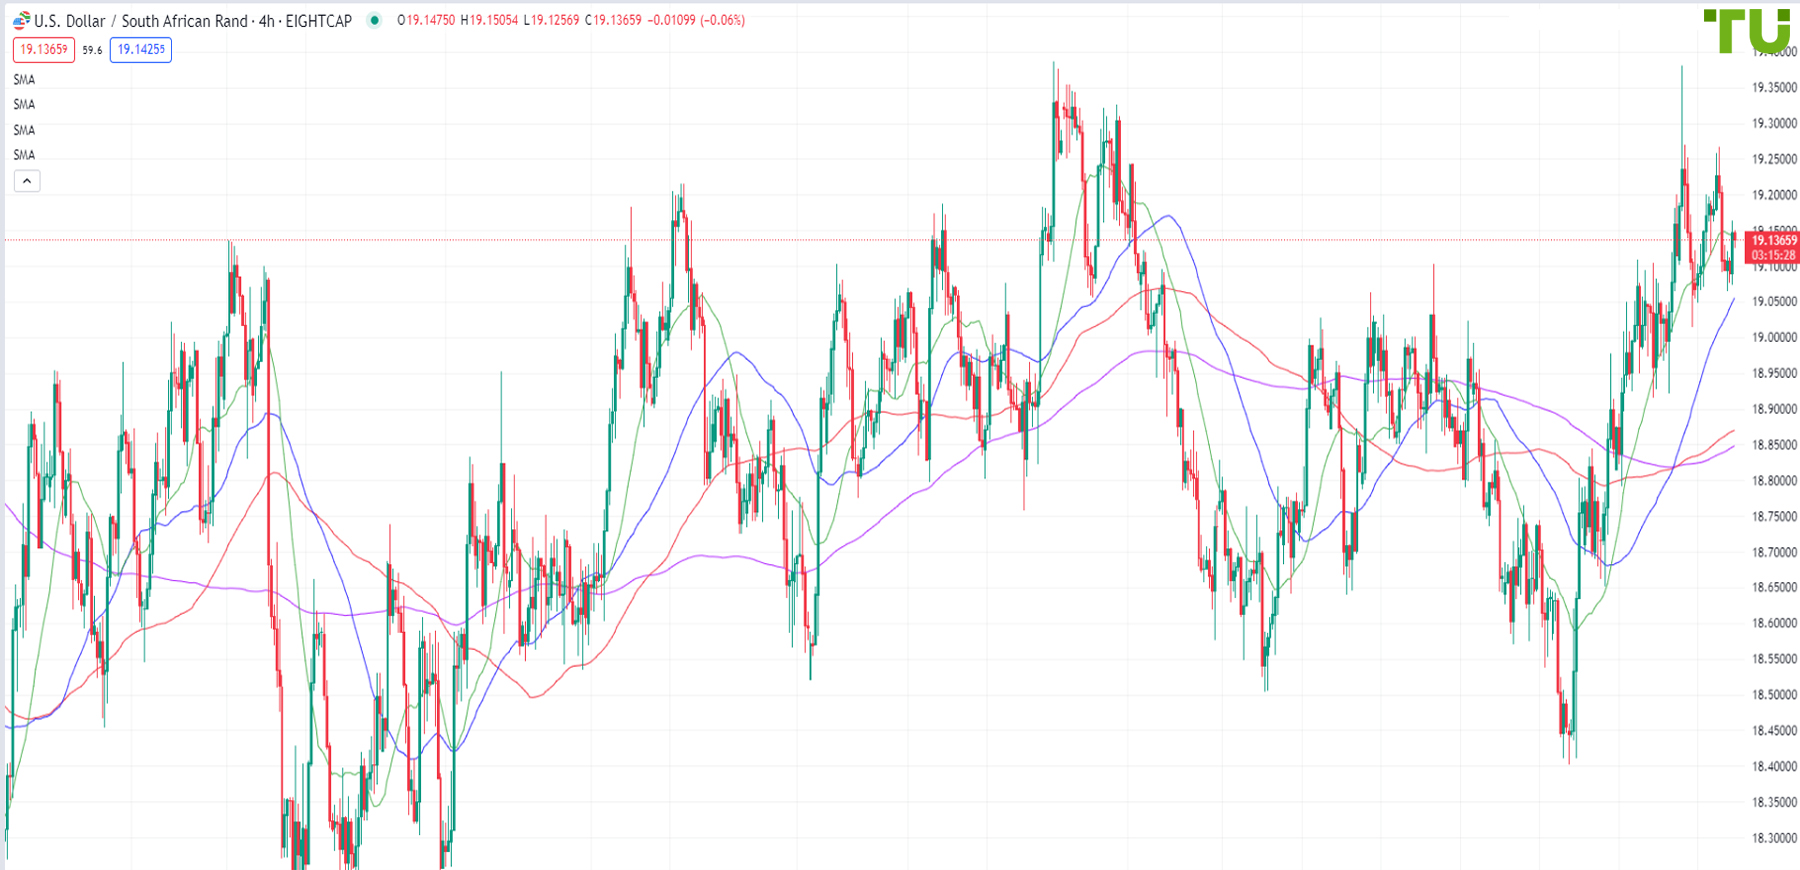 USD/ZAR failed to break 19.25 resistance, bears are testing 19.00 support